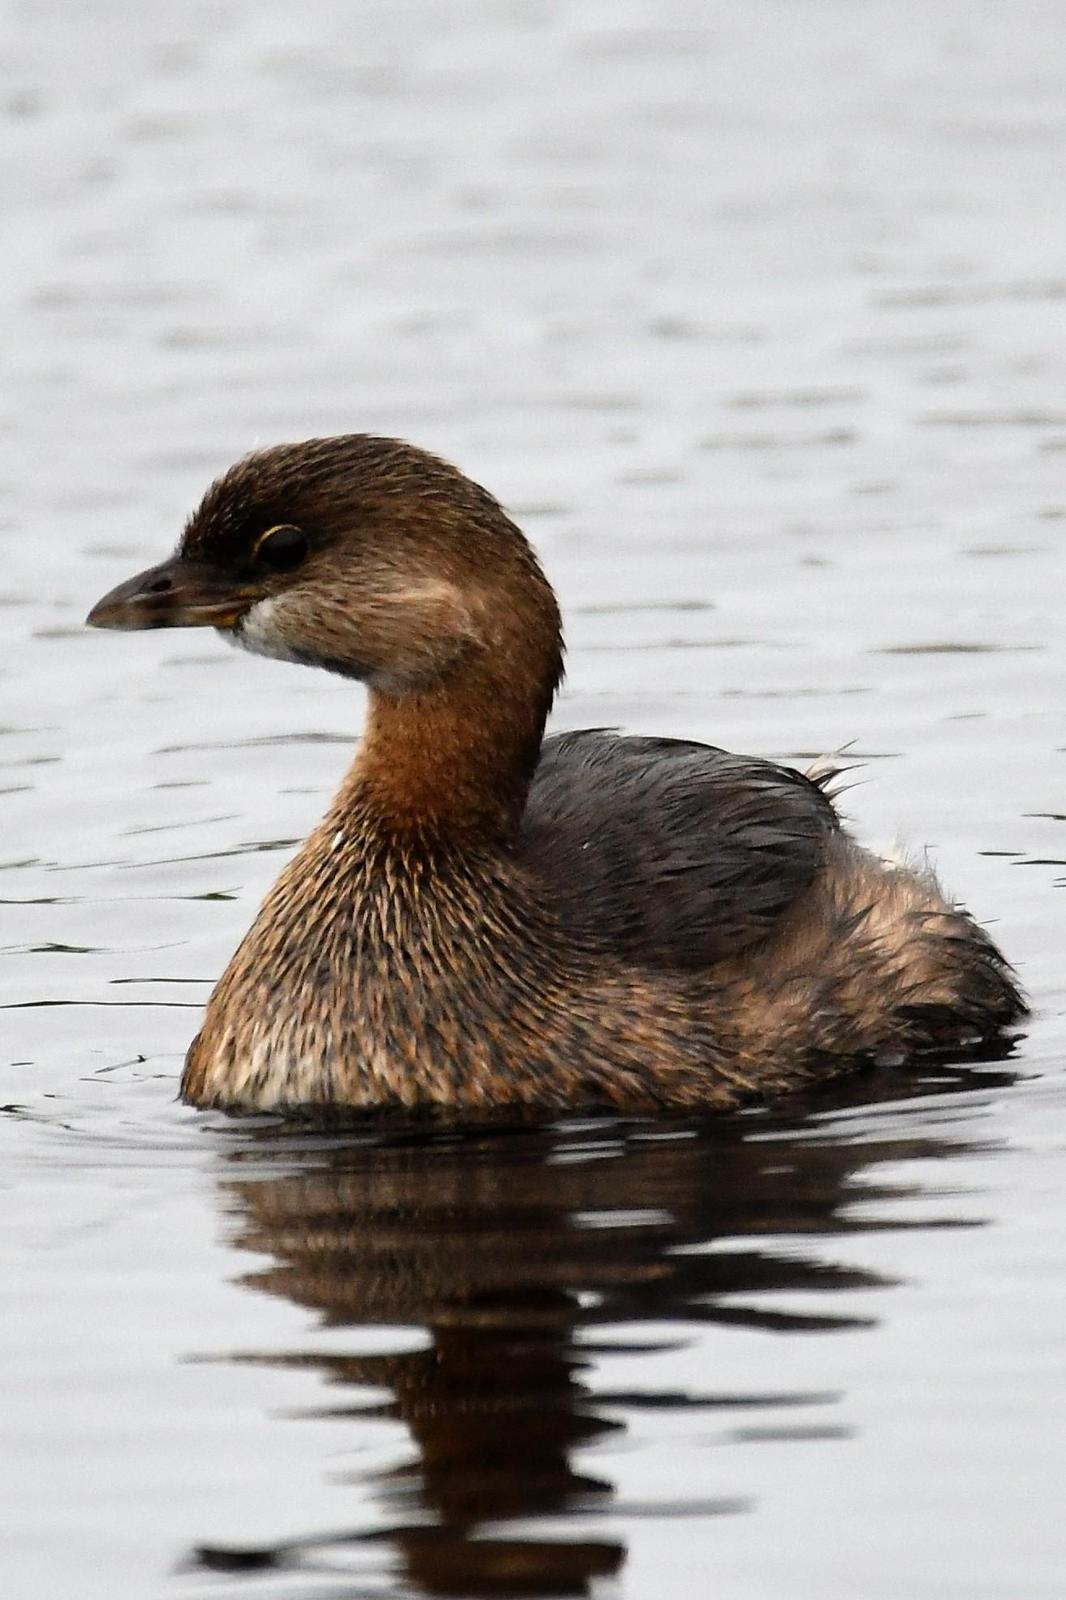 Pied-billed Grebe Photo by Jerry Chen